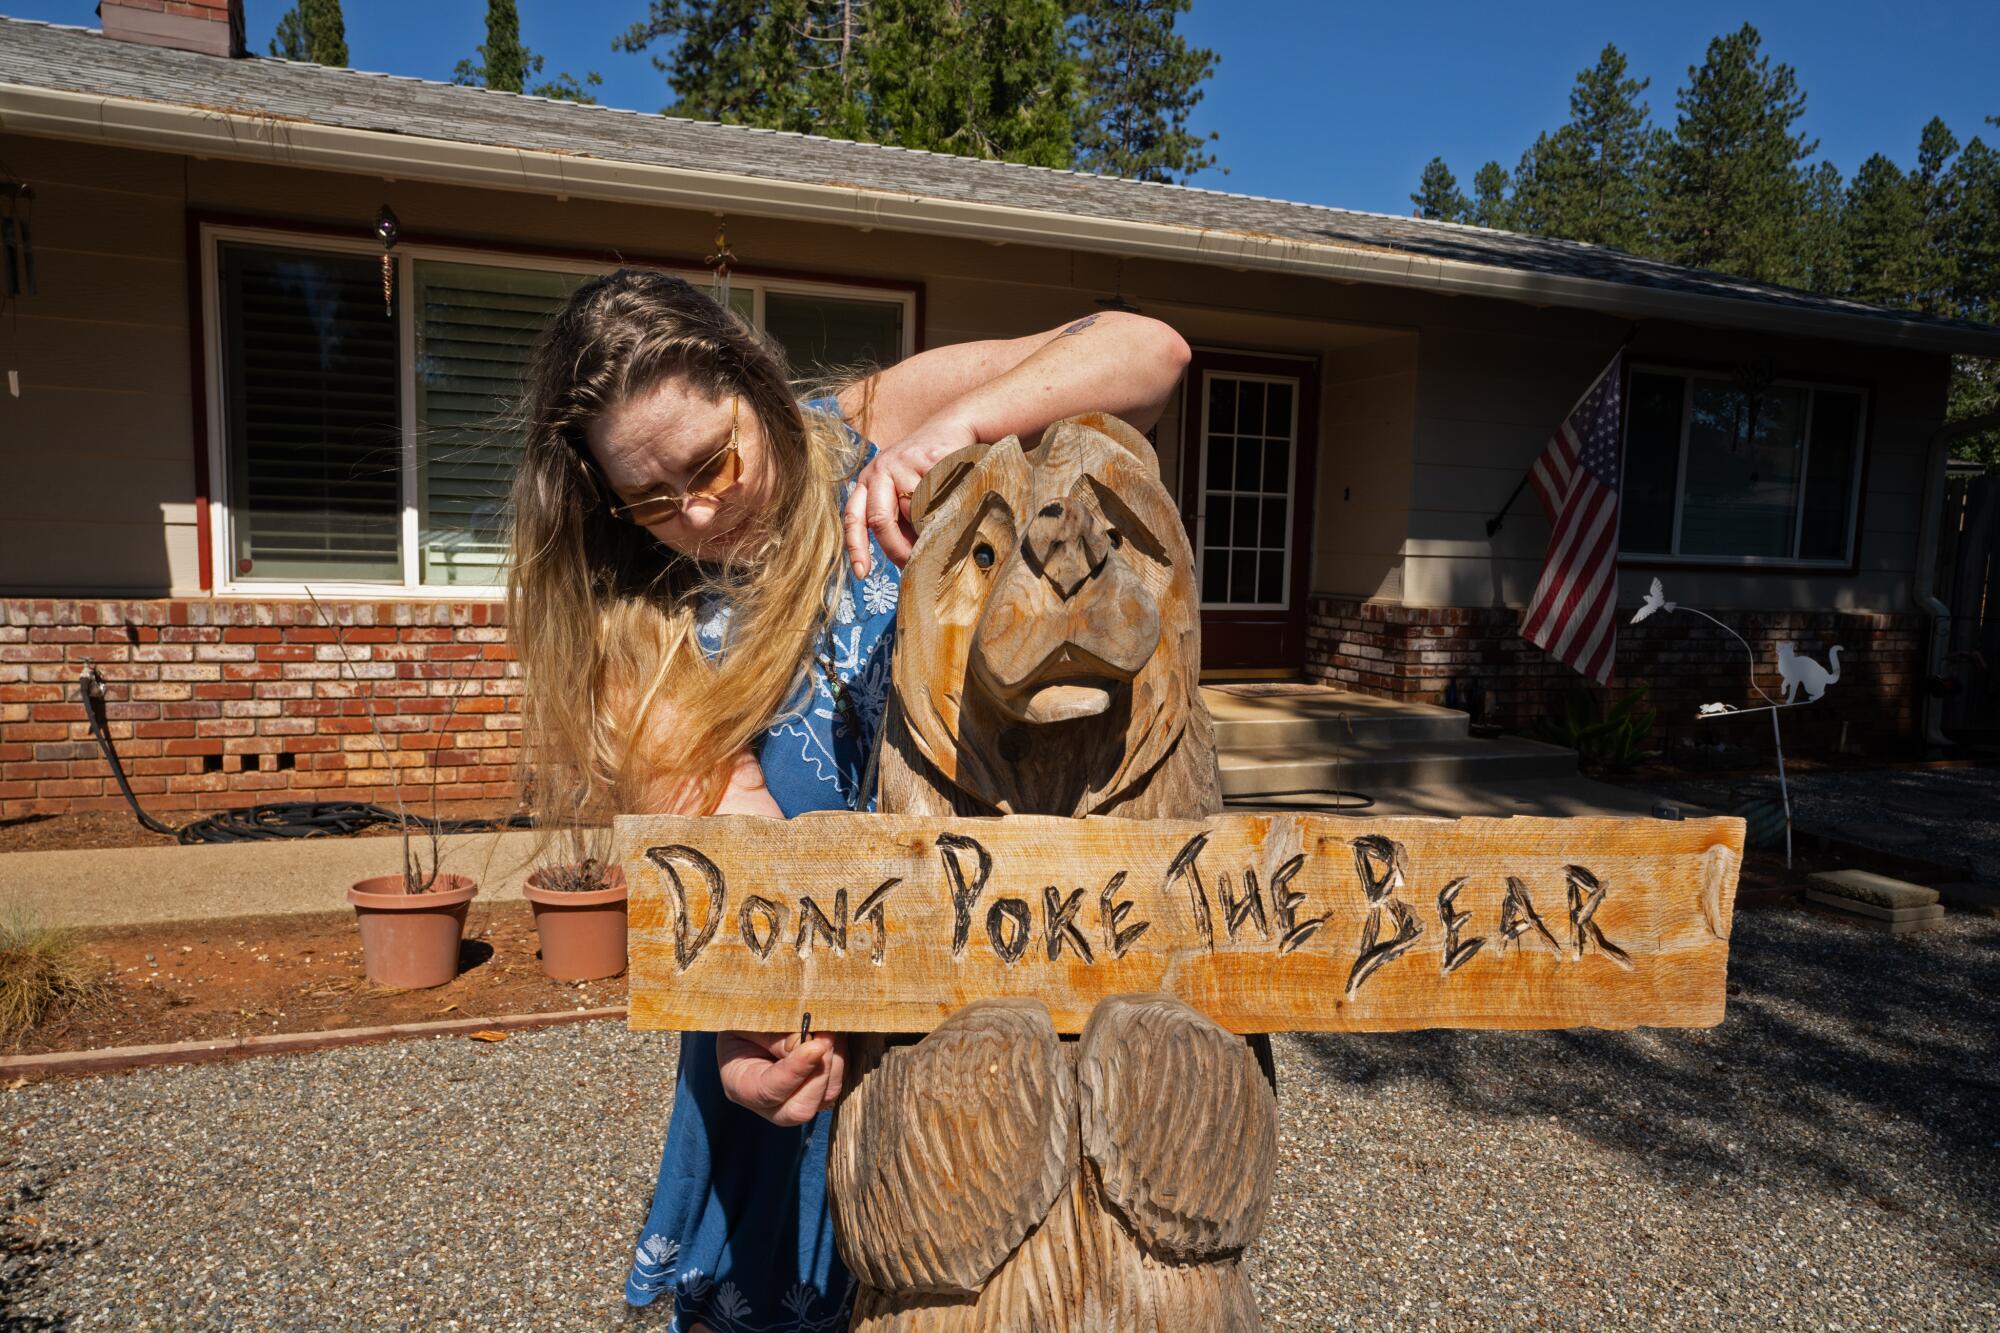 A woman adjusts a sign in front of her home.